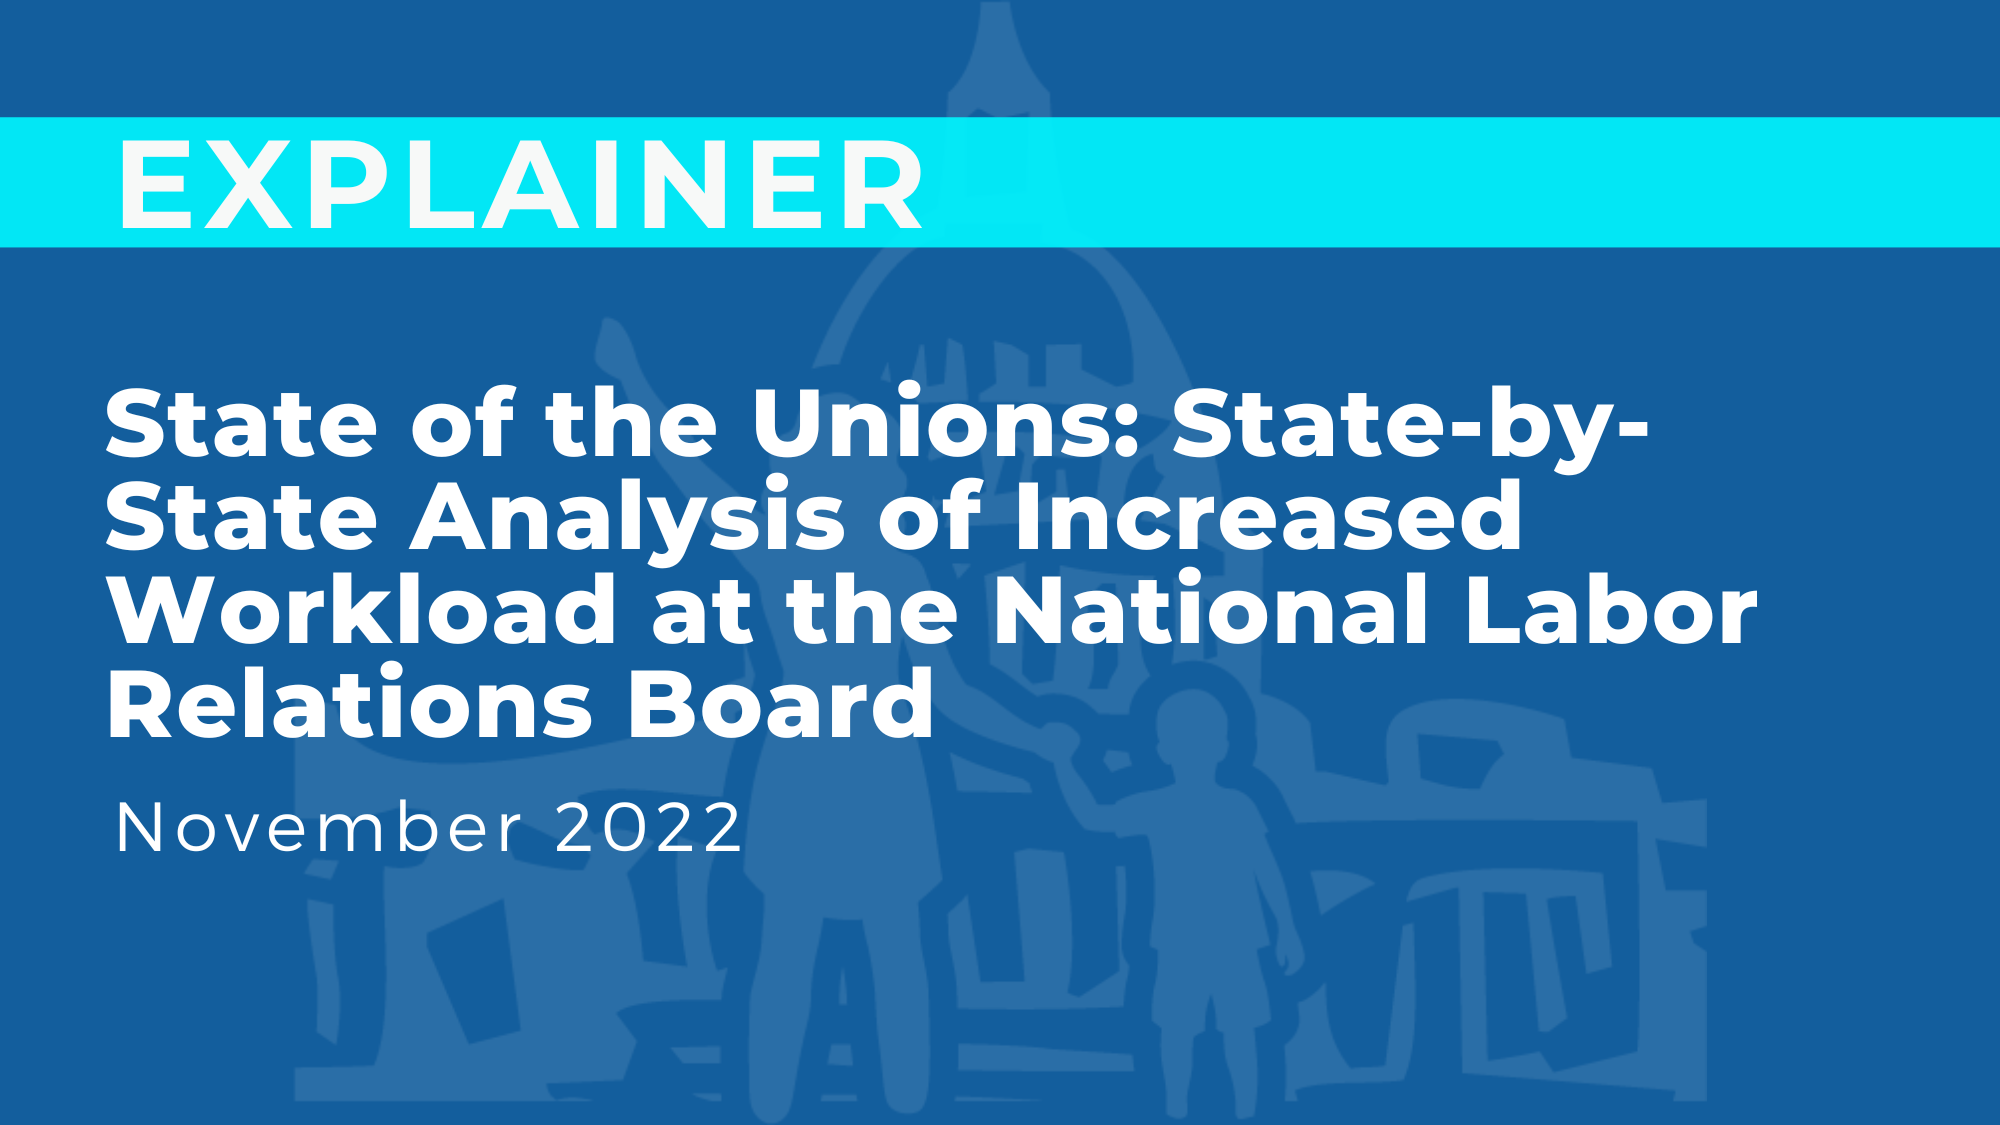 State of the Unions: State-by-State Analysis of Increased Workload at the National Labor Relations Board